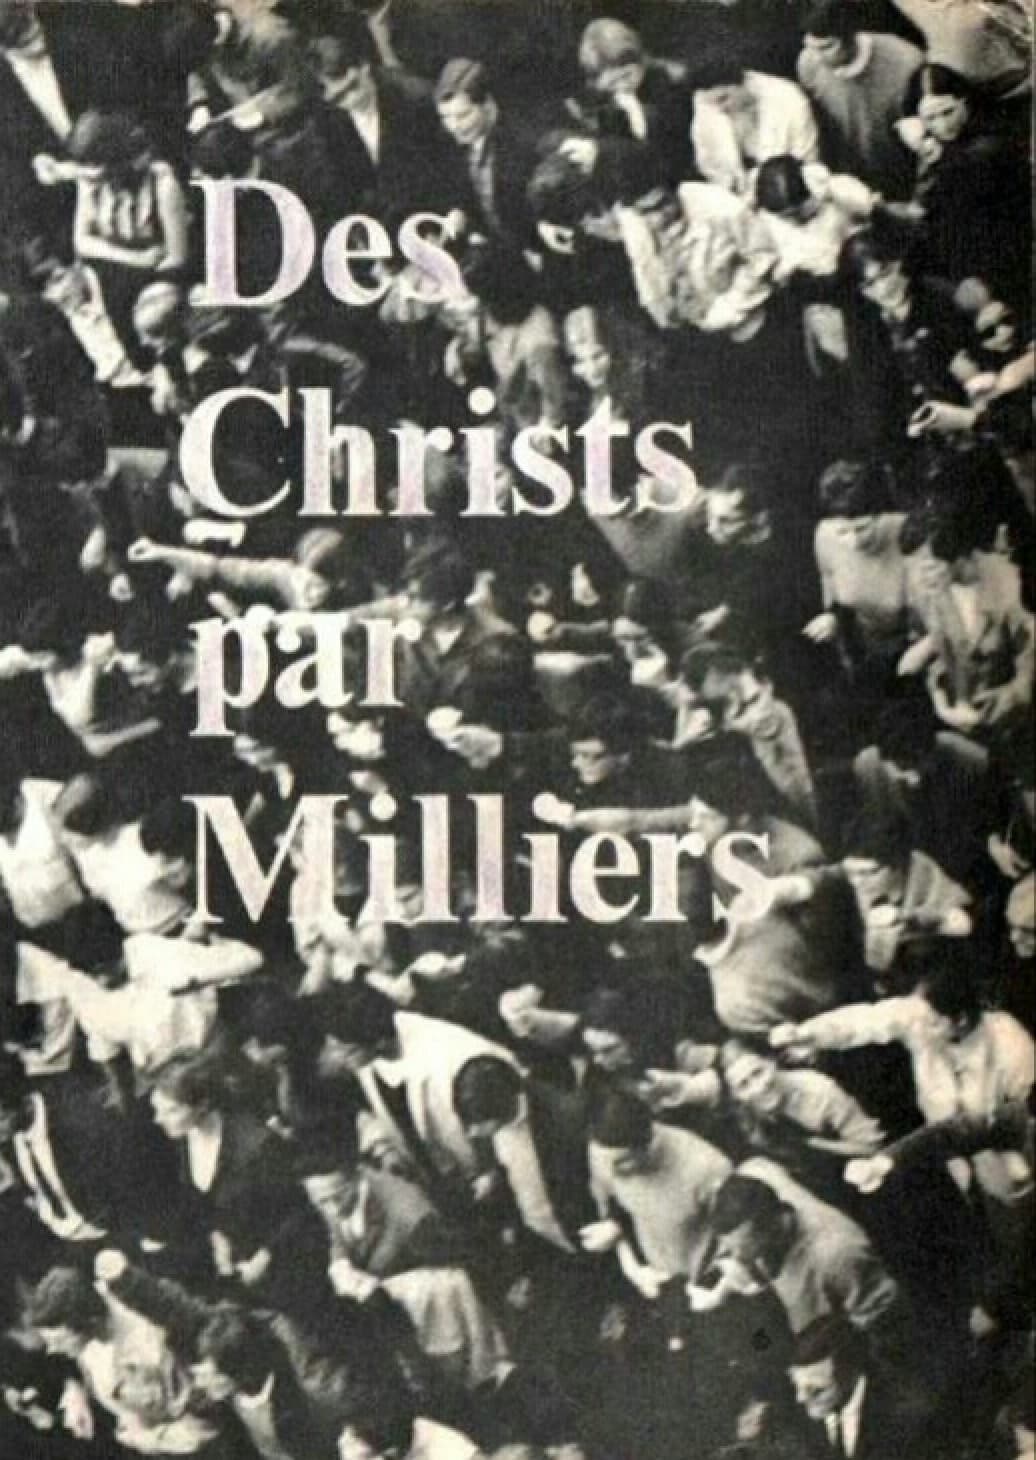 Christs in the Thousands (1969)